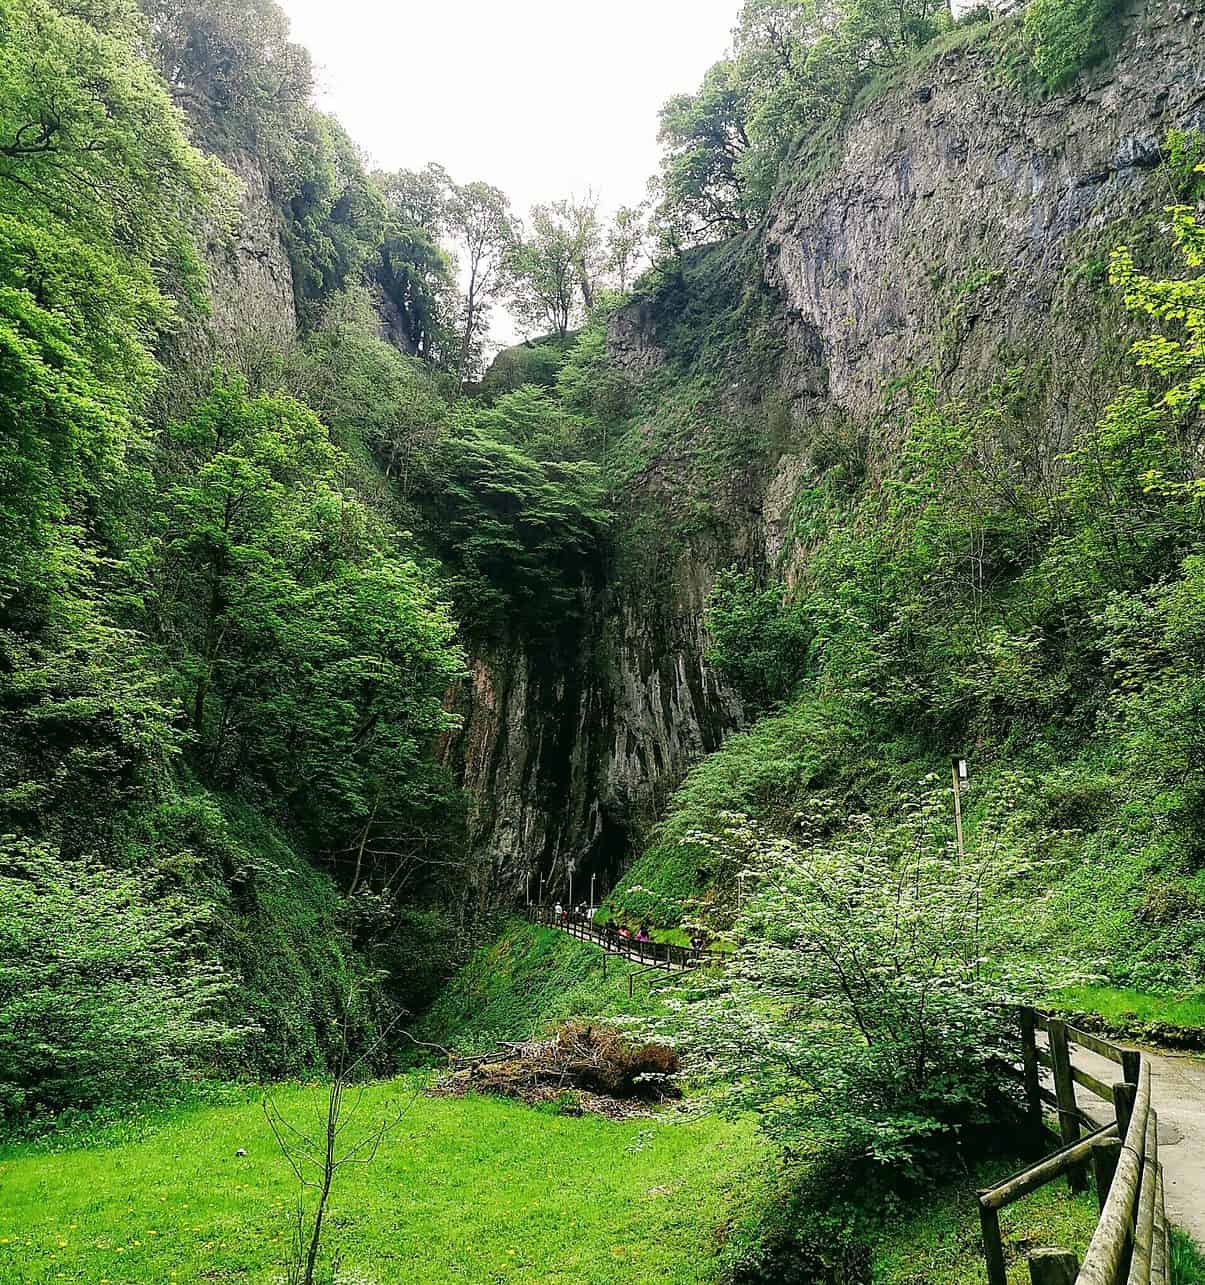 The entrance of Peak Cavern in Castleton is the largest cave entrance in the UK